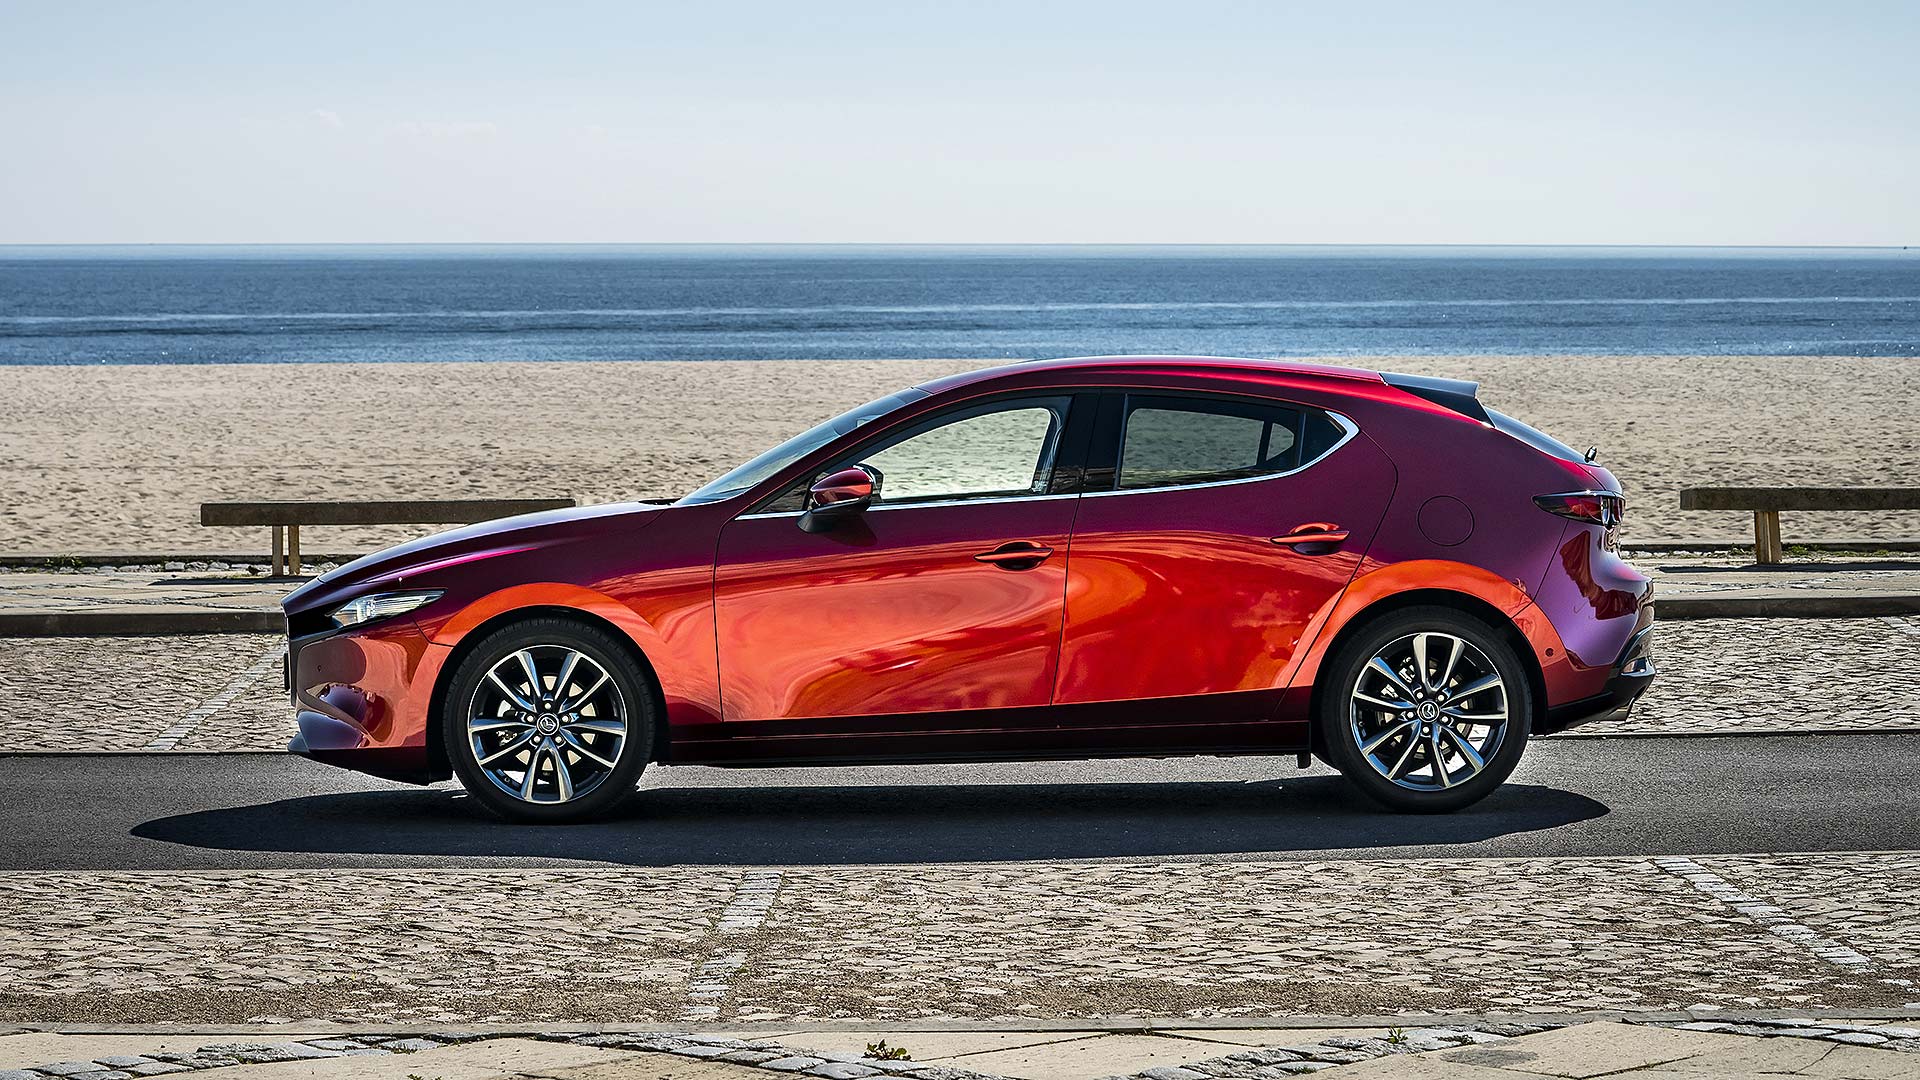 New 2019 Mazda 3 prices, specs and UK launch date revealed - Motoring ...